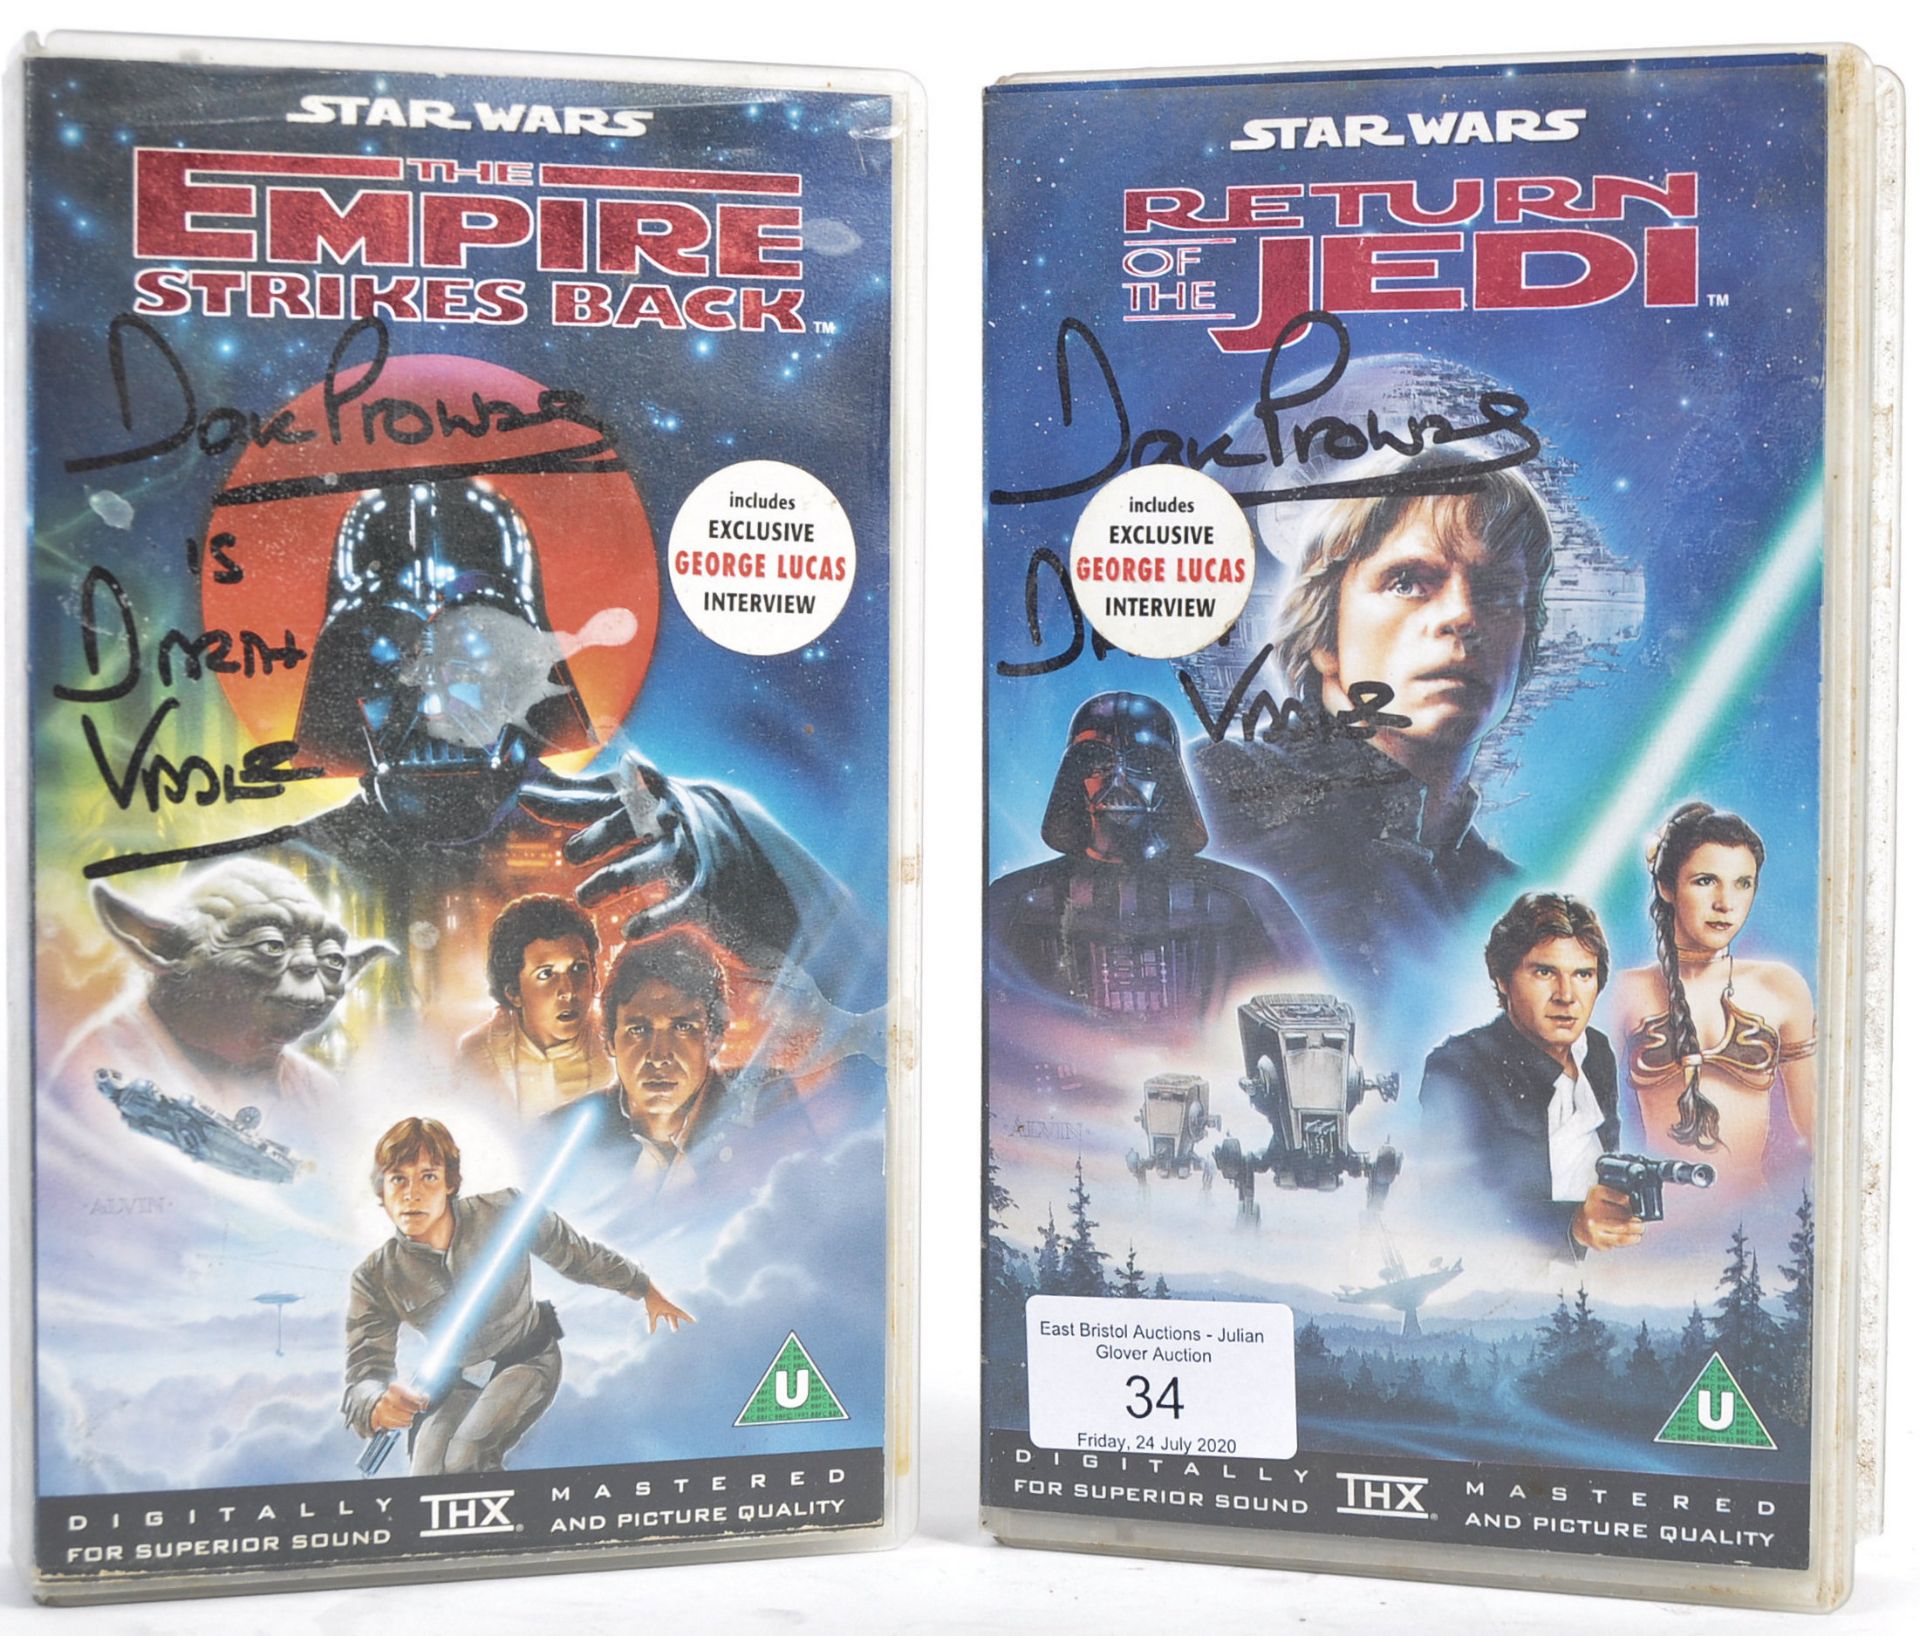 STAR WARS - DAVE PROWSE AUTOGRAPHED VHS COVERS